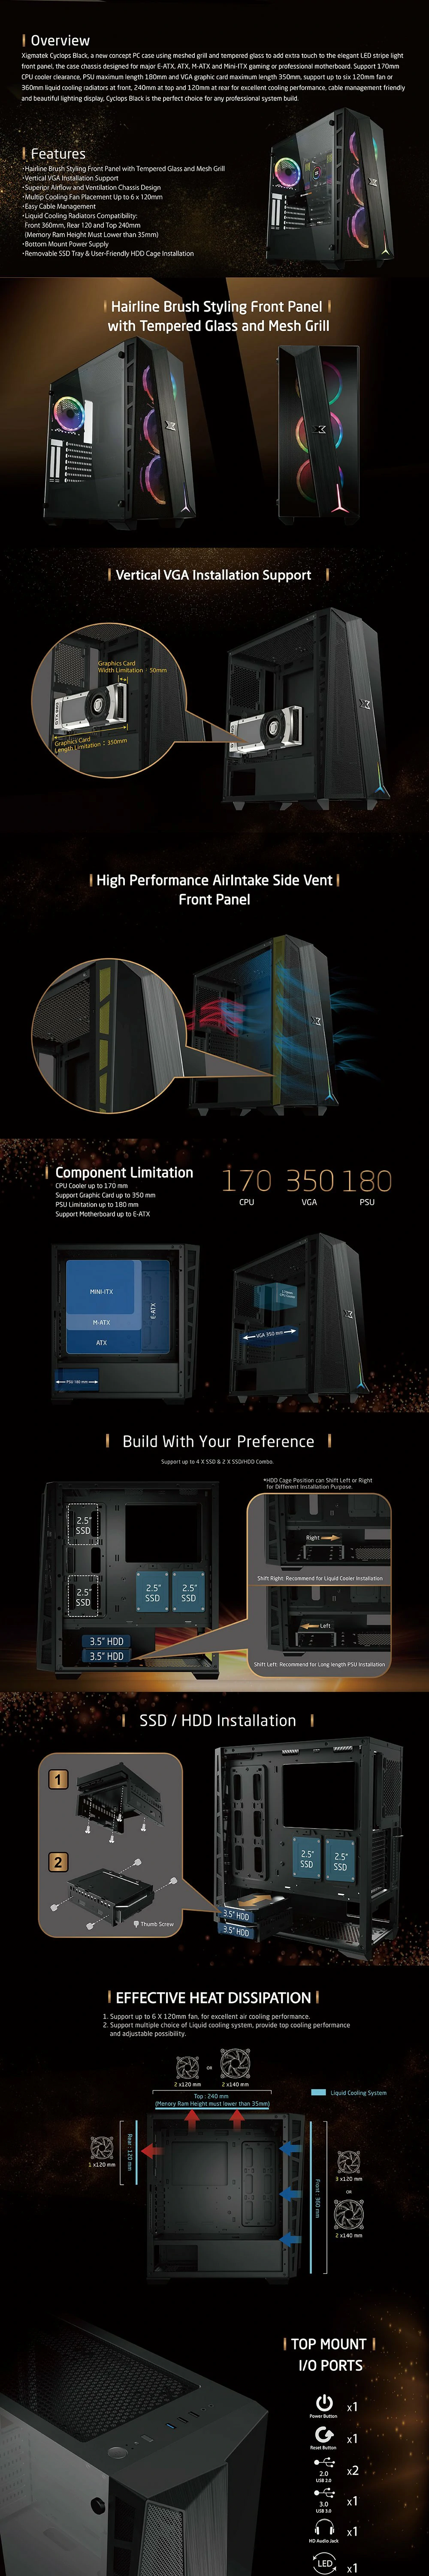 Overview - Specifications - Xigmatek - Cyclops - Black Tempered Glass ARGB Mid Tower Chassis